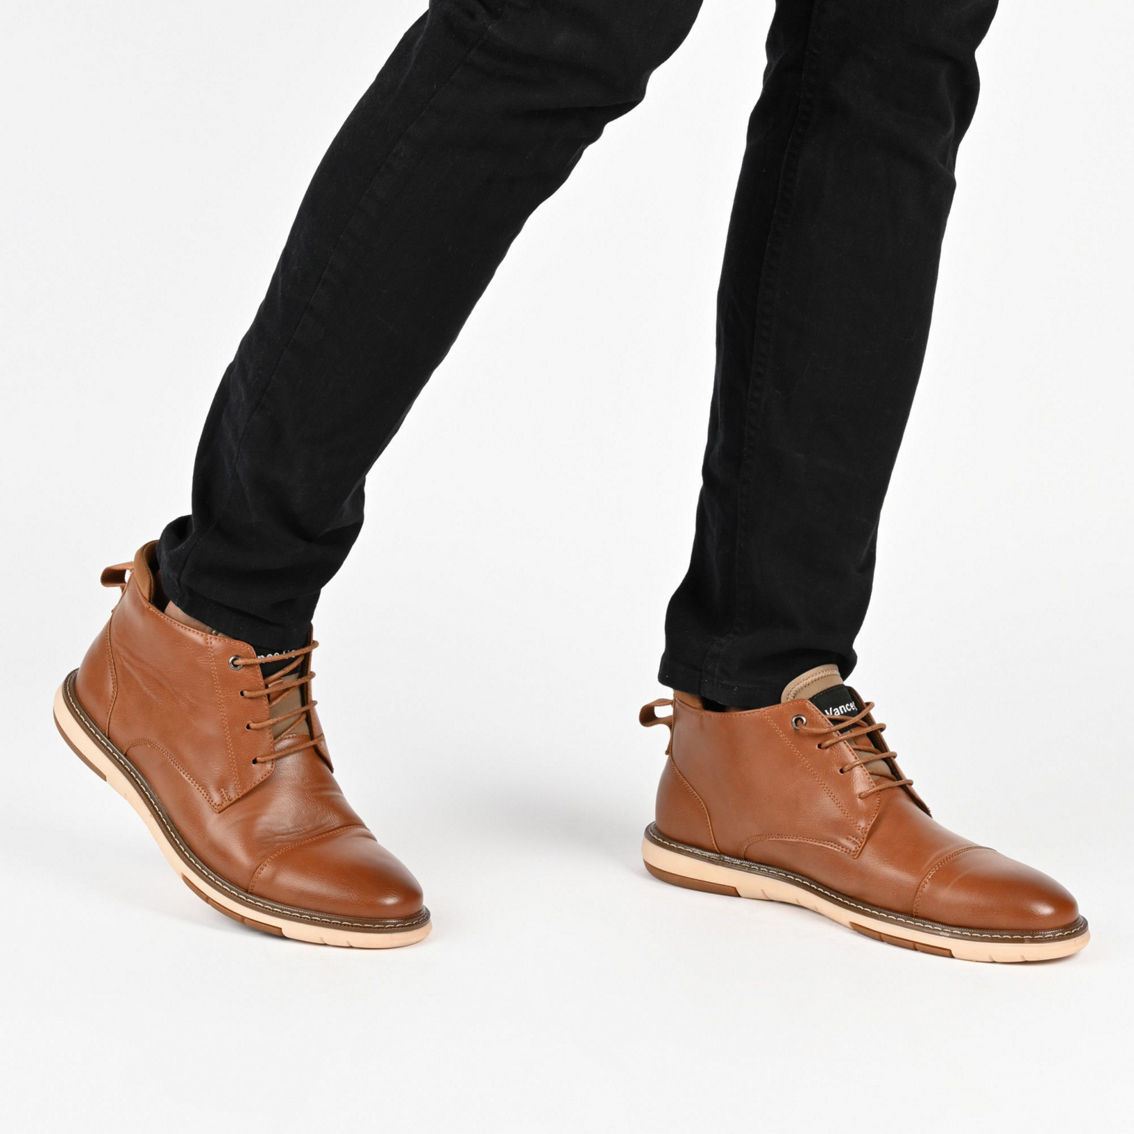 Vance Co. Redford Lace-up Hybrid Chukka Boot - Image 5 of 5